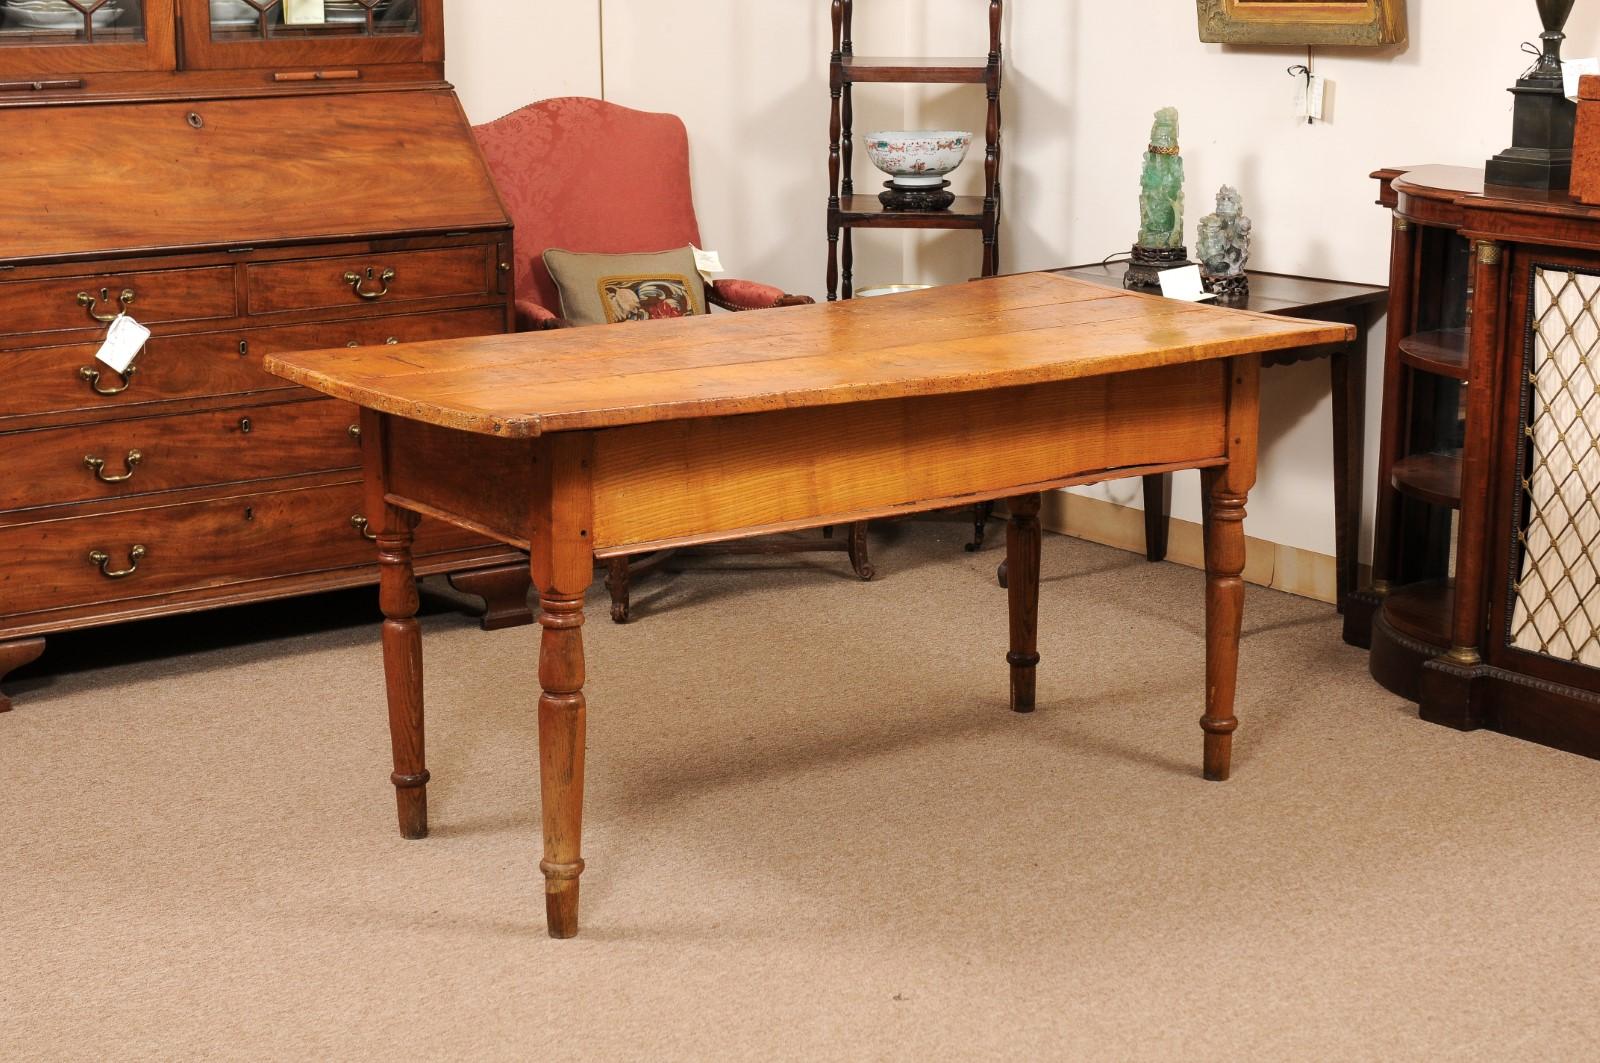 Large American Pine Kitchen Table with 2 Deep Drawers and Turned Legs, c1890 For Sale 5